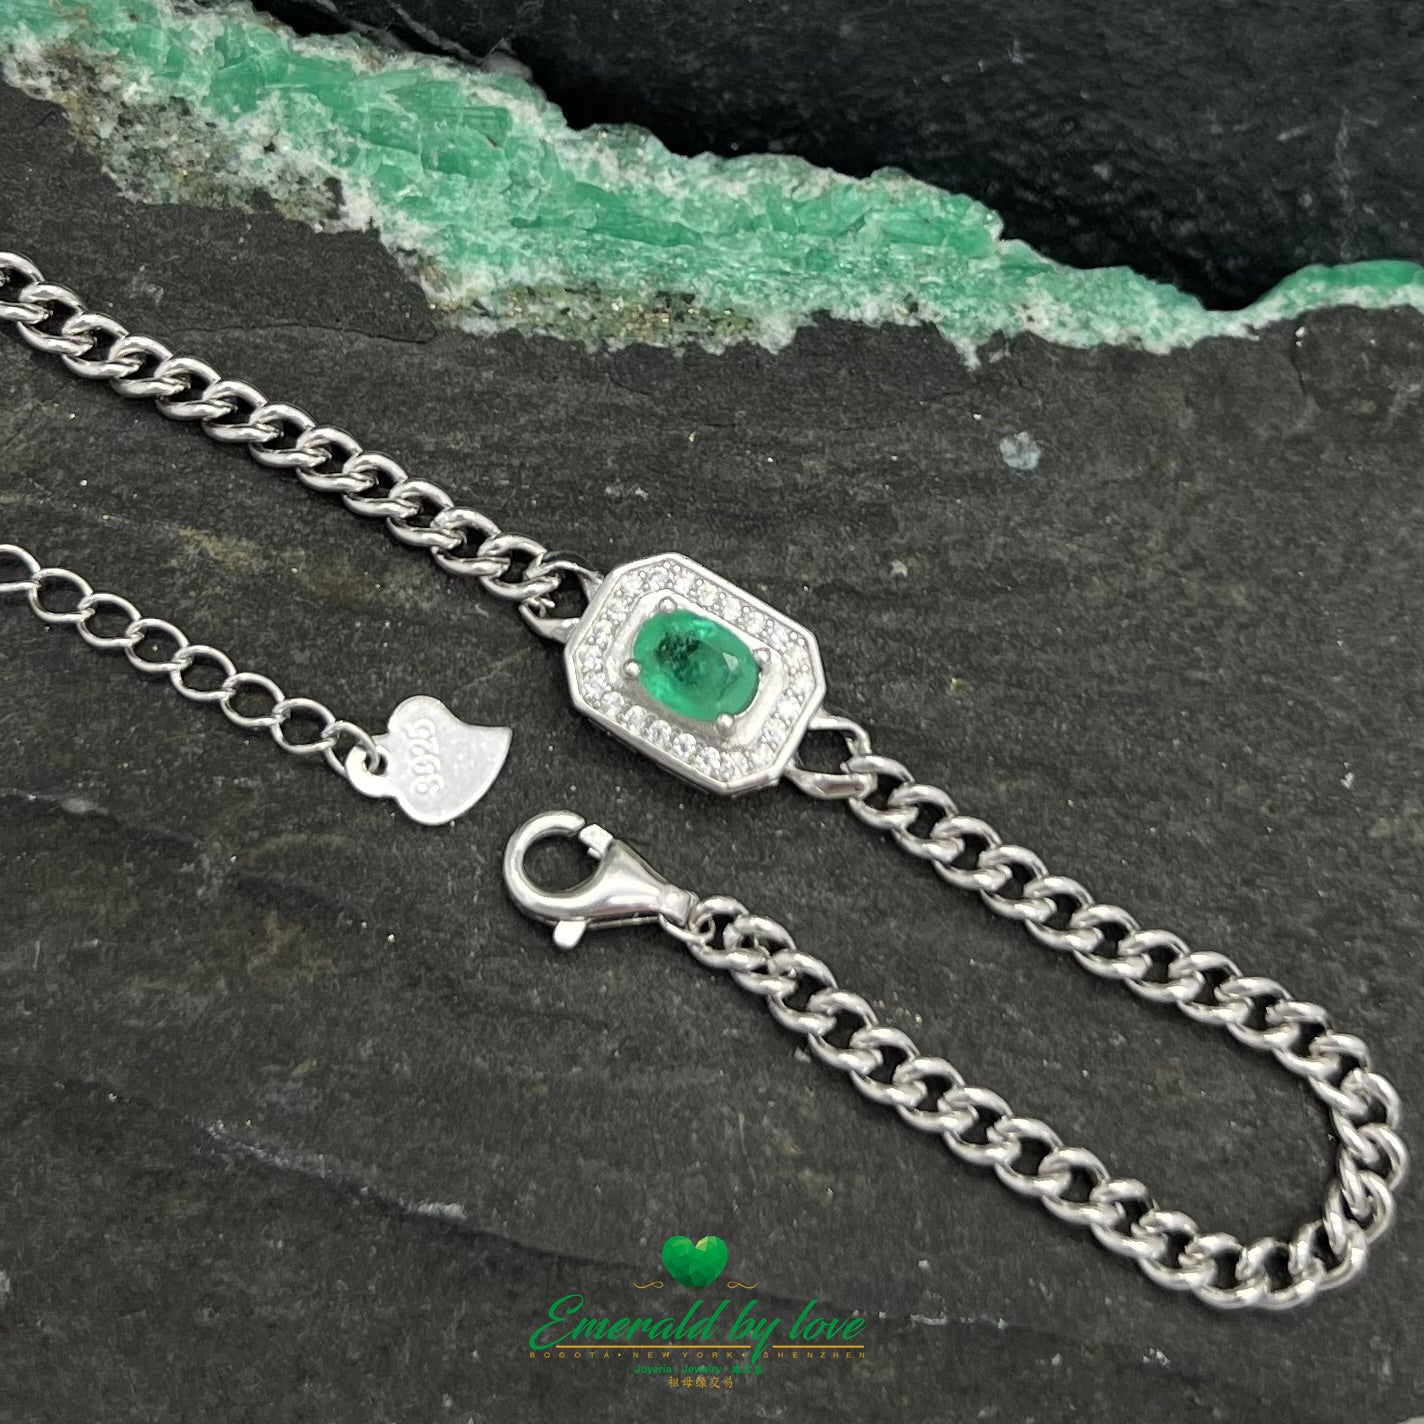 Sterling Silver Bracelet with Oval Crystal Emerald on Rectangular Plate